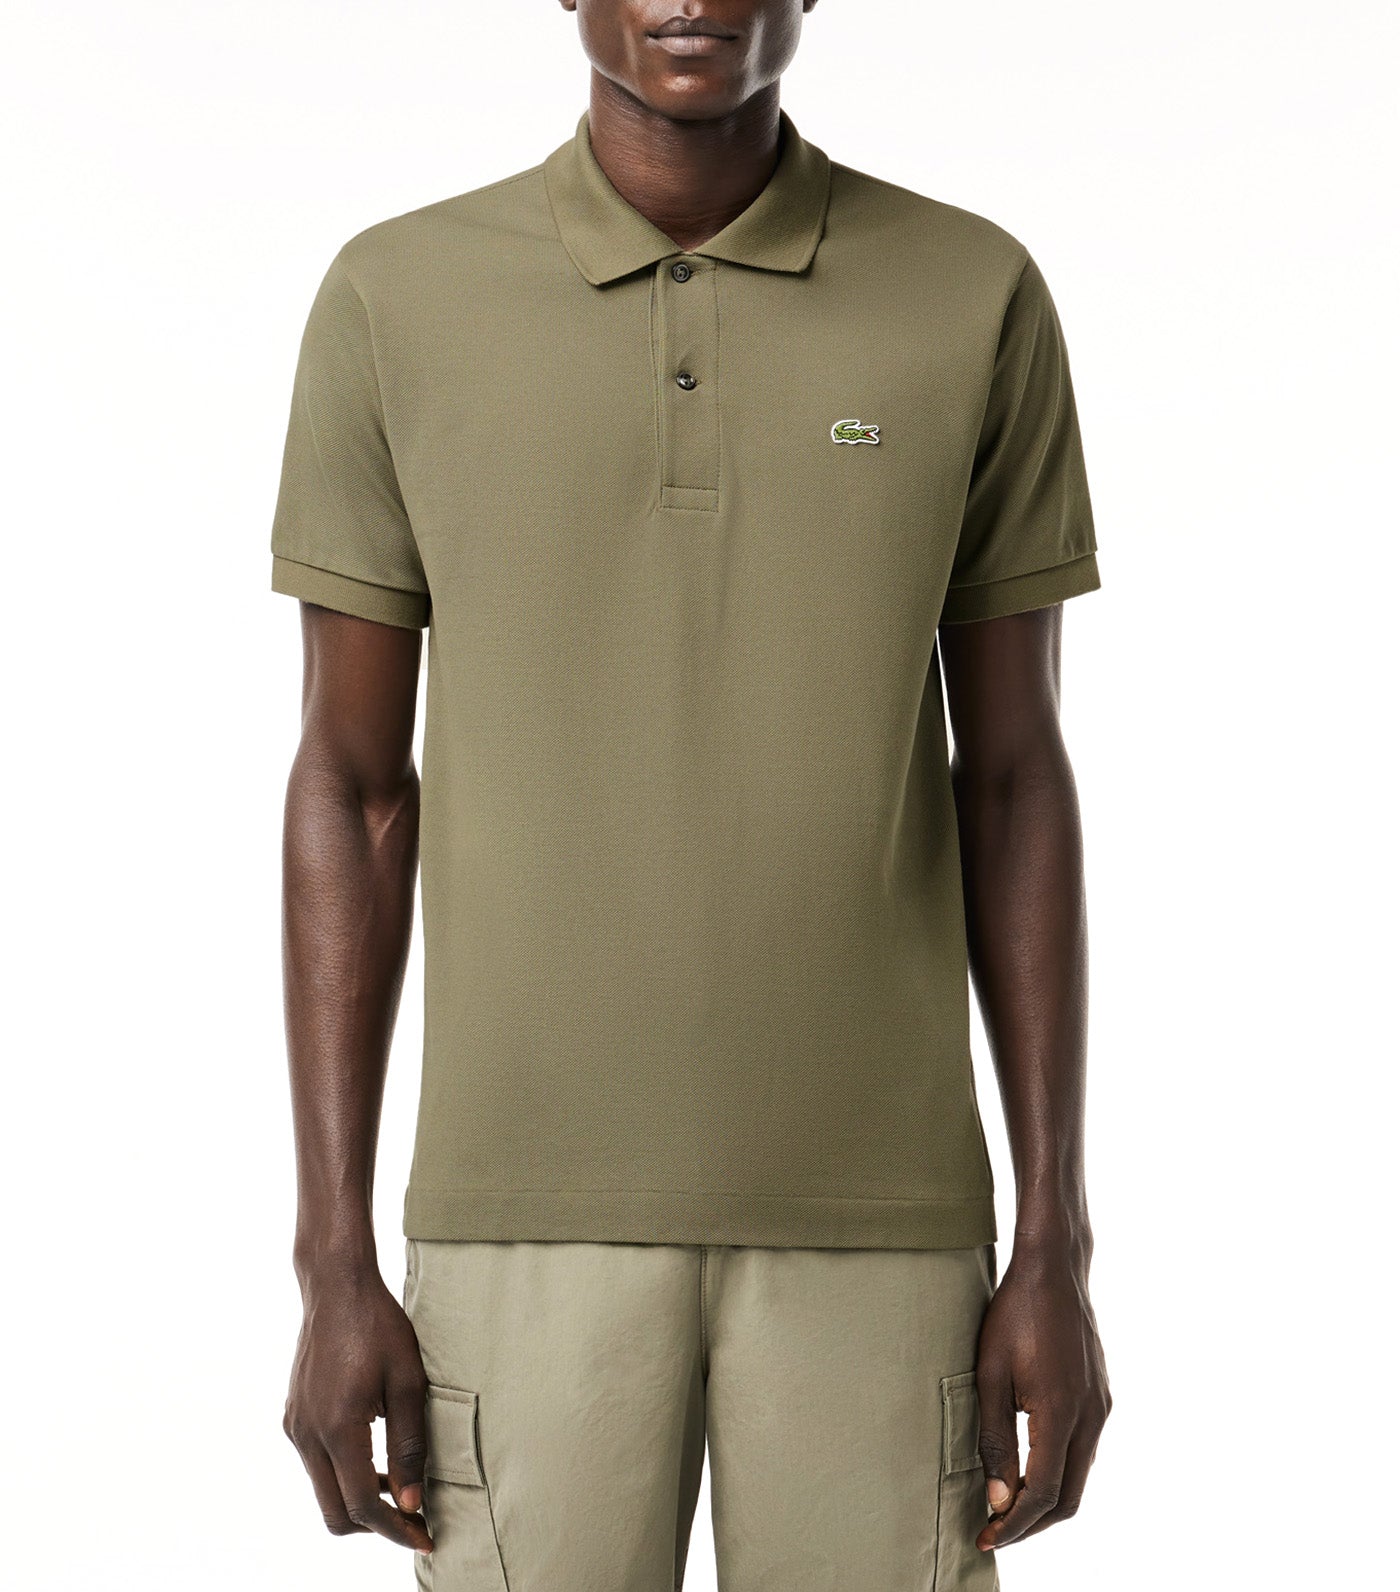 Lacoste Classic Fit L.12.12 Polo Shirt Tank